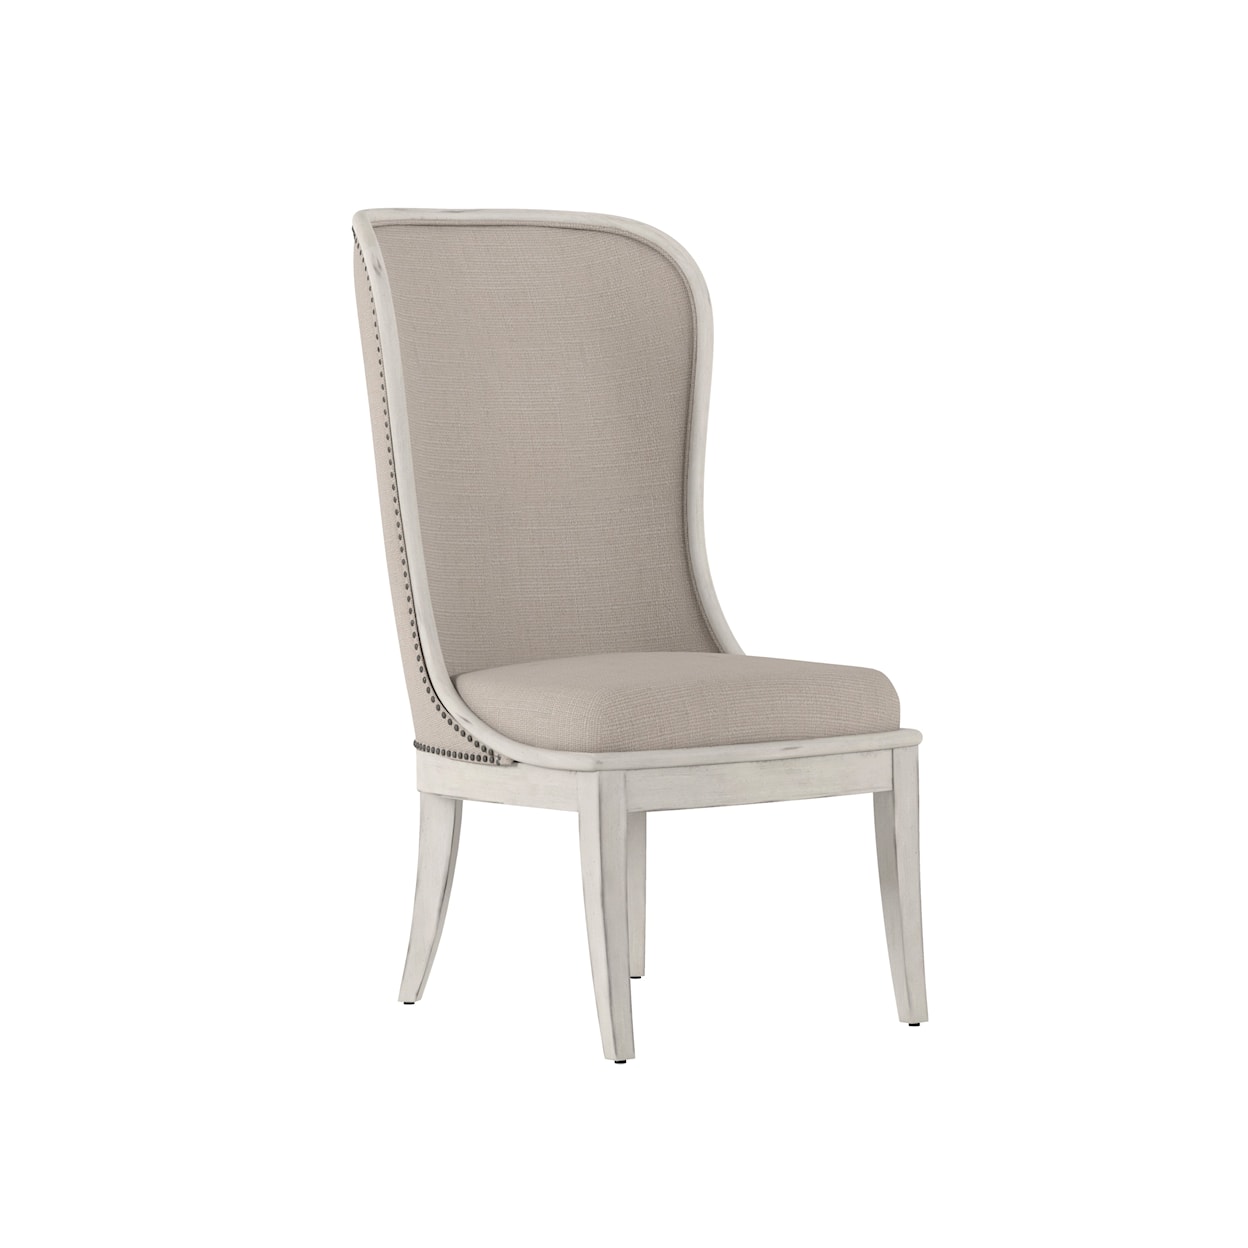 A.R.T. Furniture Inc Alcove Dining Chair